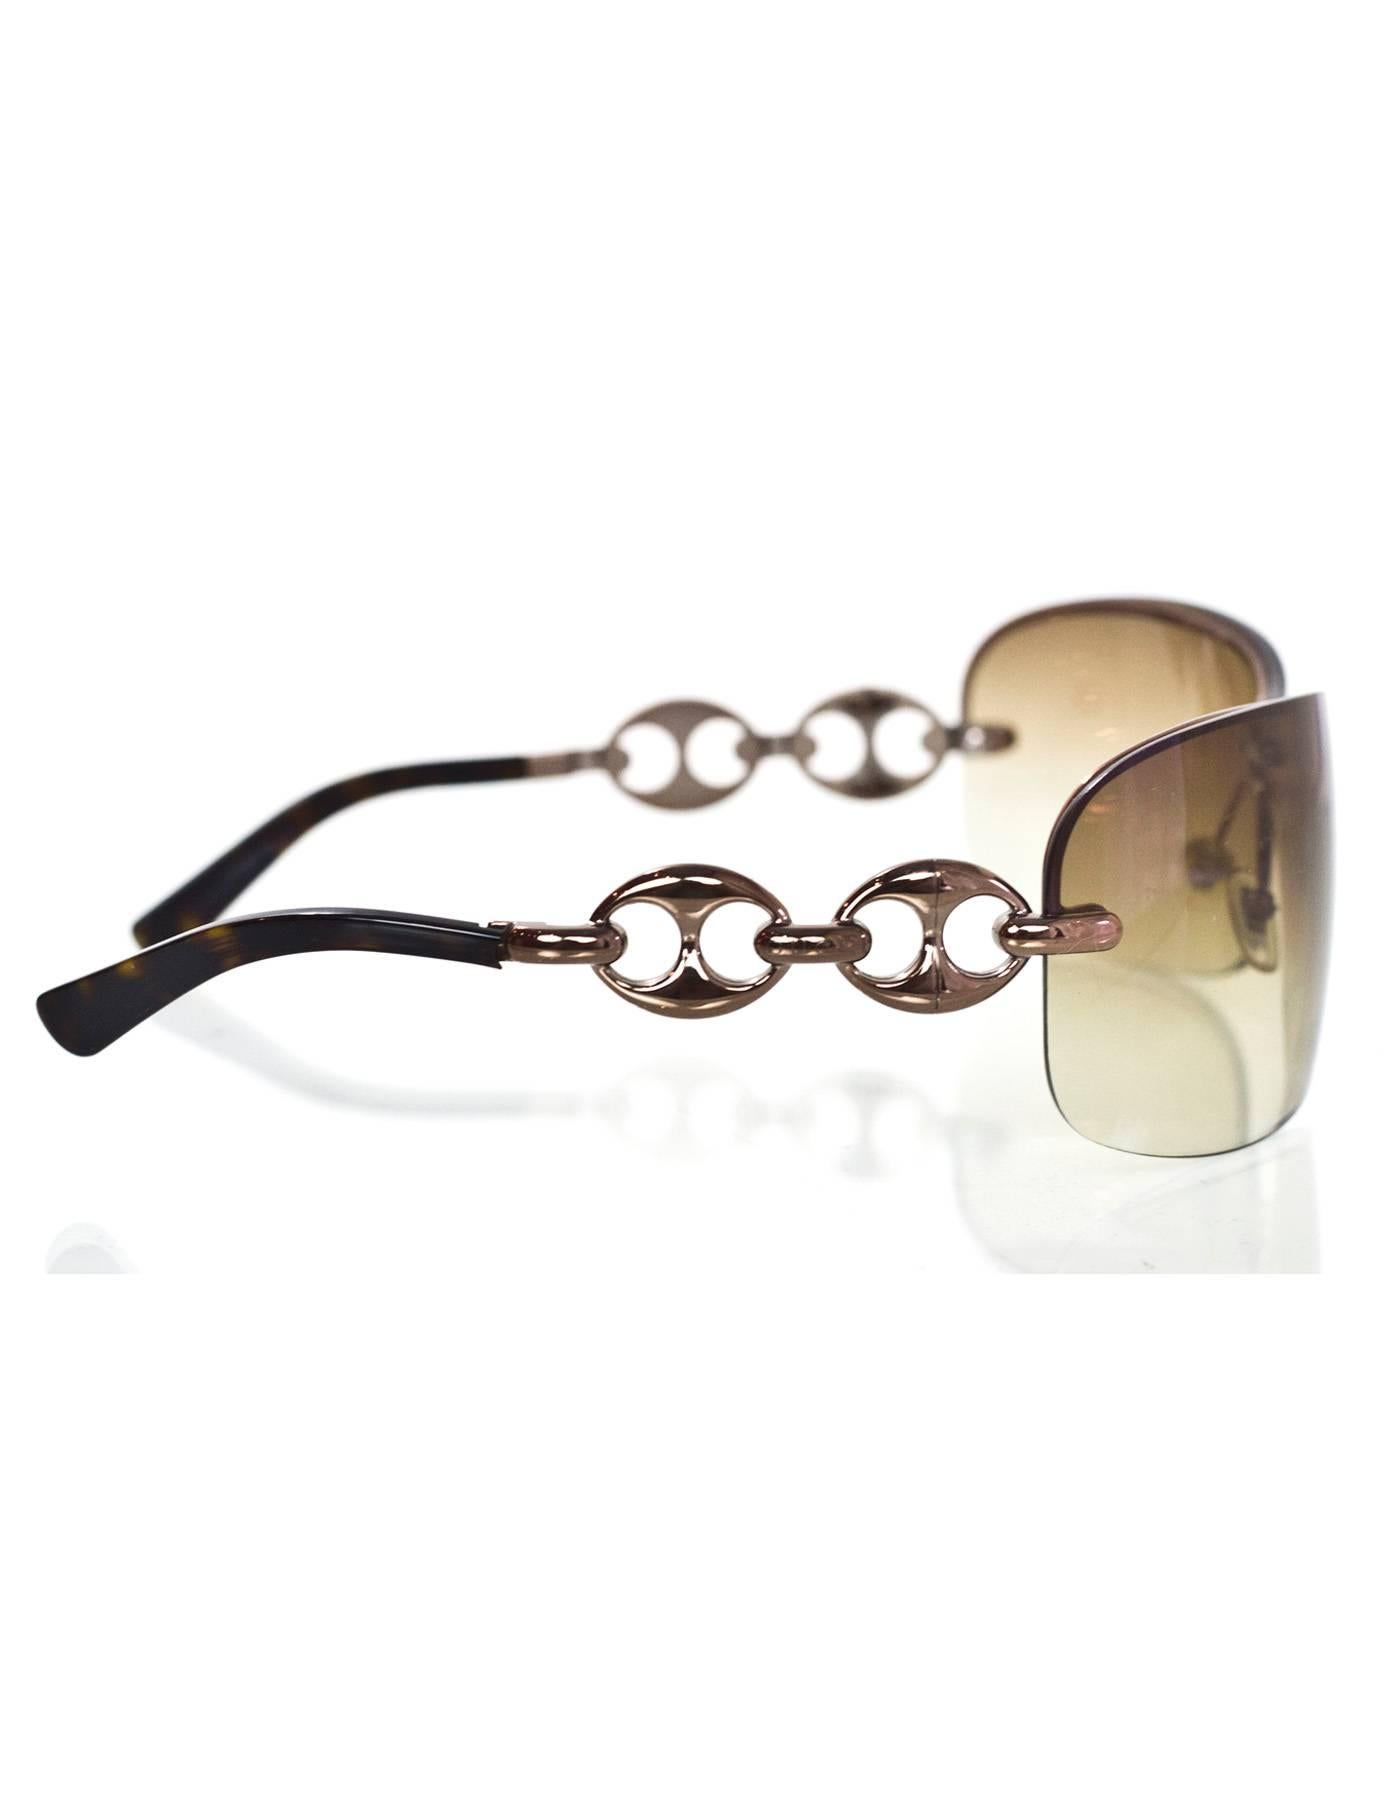 Gucci Brown Shield Sunglasses
Features horsebit arms

Made In: Italy
Color: Brown
Materials: Metal
Overall Condition: Excellent pre-owned condition with the exception of bent arms, surface marks at frame
Includes: Gucci case and